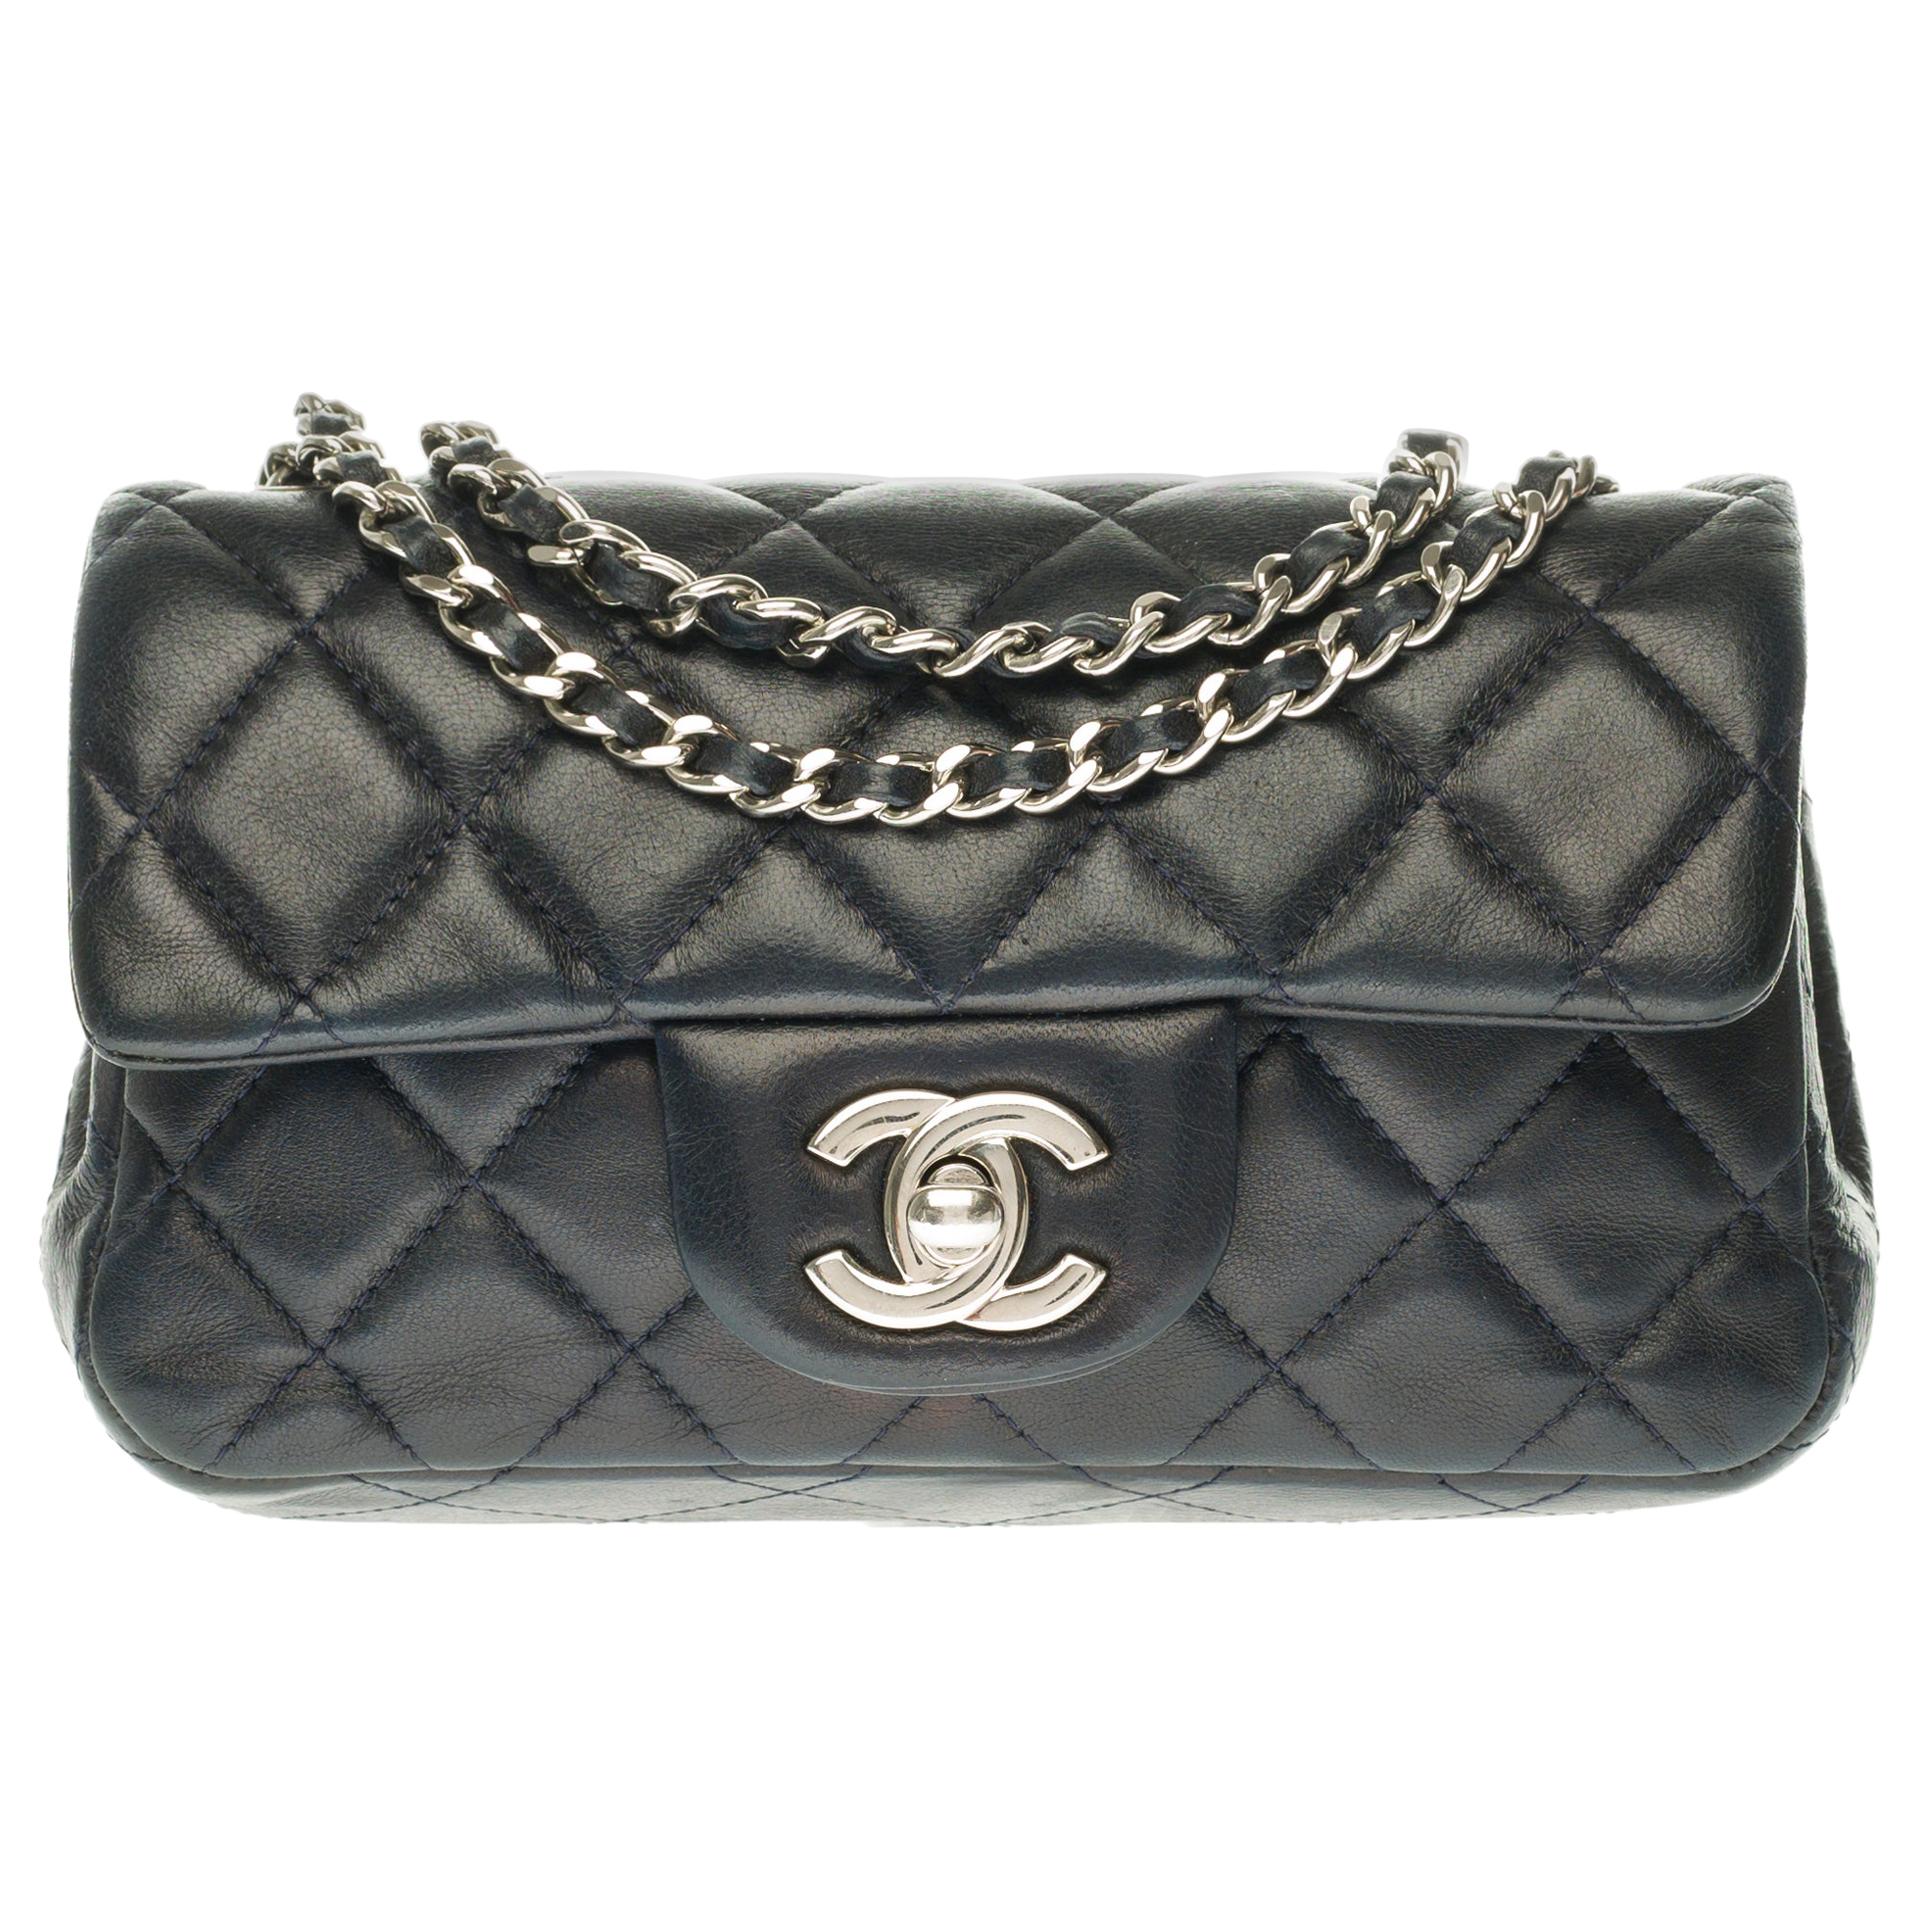 Chanel Mini square shoulder bag in black quilted leather, Silver hardware